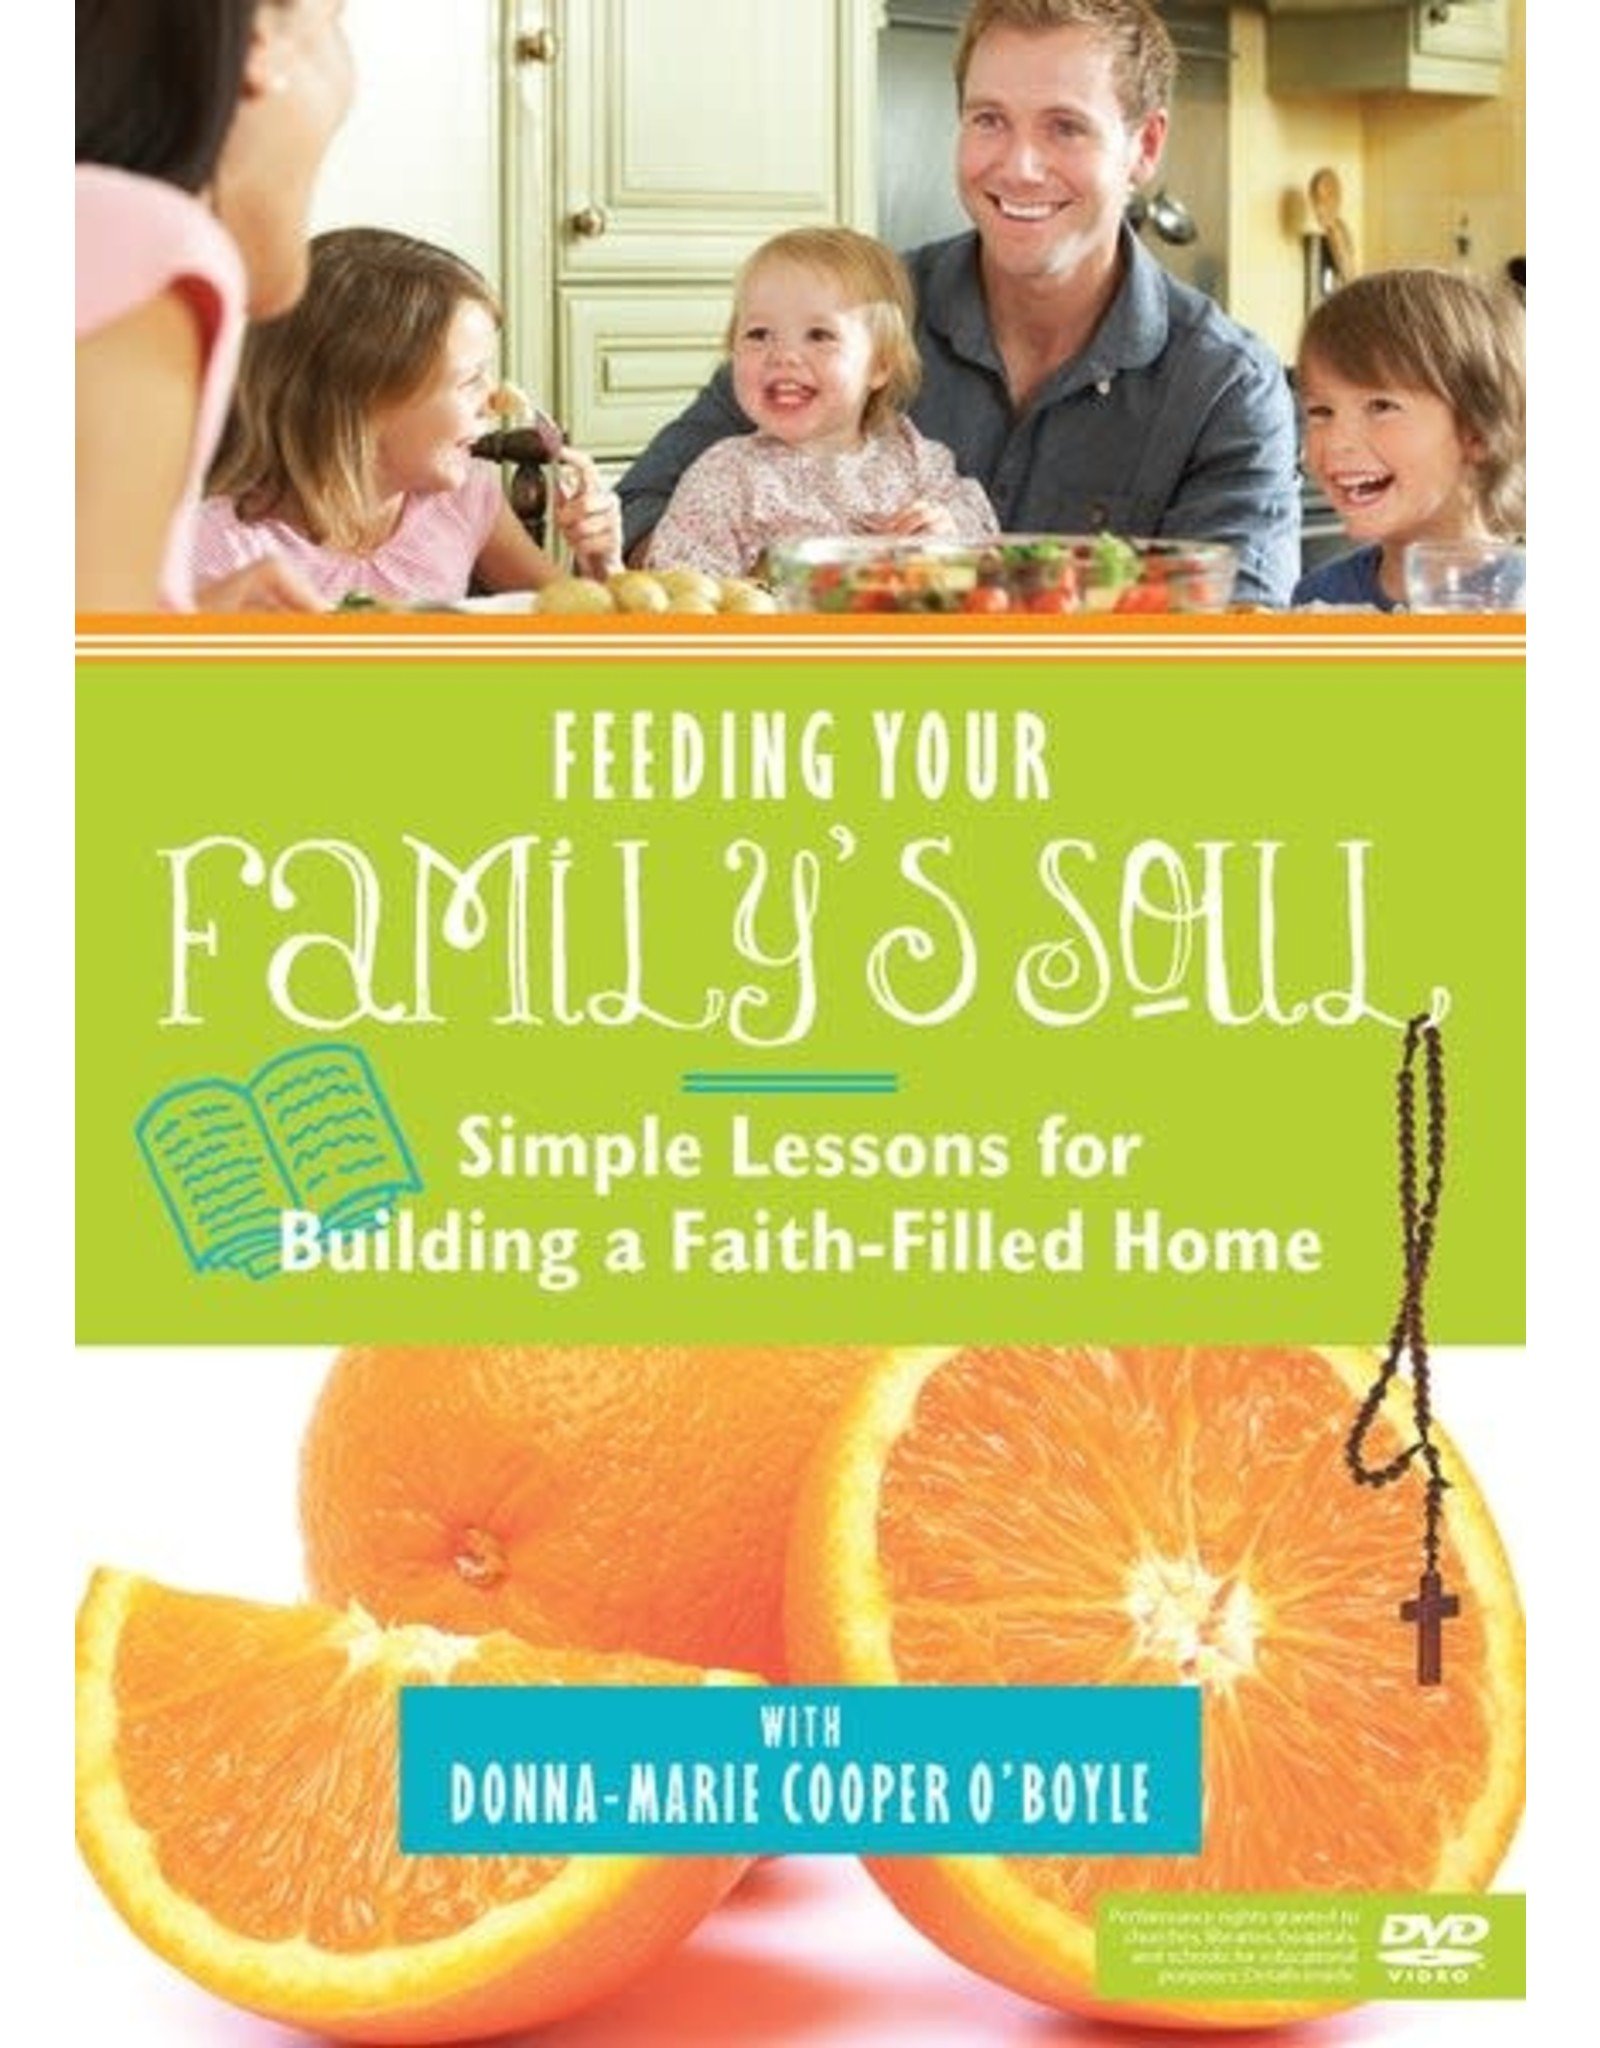 Paraclete Press Feeding Your Family's Soul Simple Lessons for Building a Faith-Filled Home with Donna-Marie Cooper O'Boyle (DVD Lesson Set with Discussion Guide)